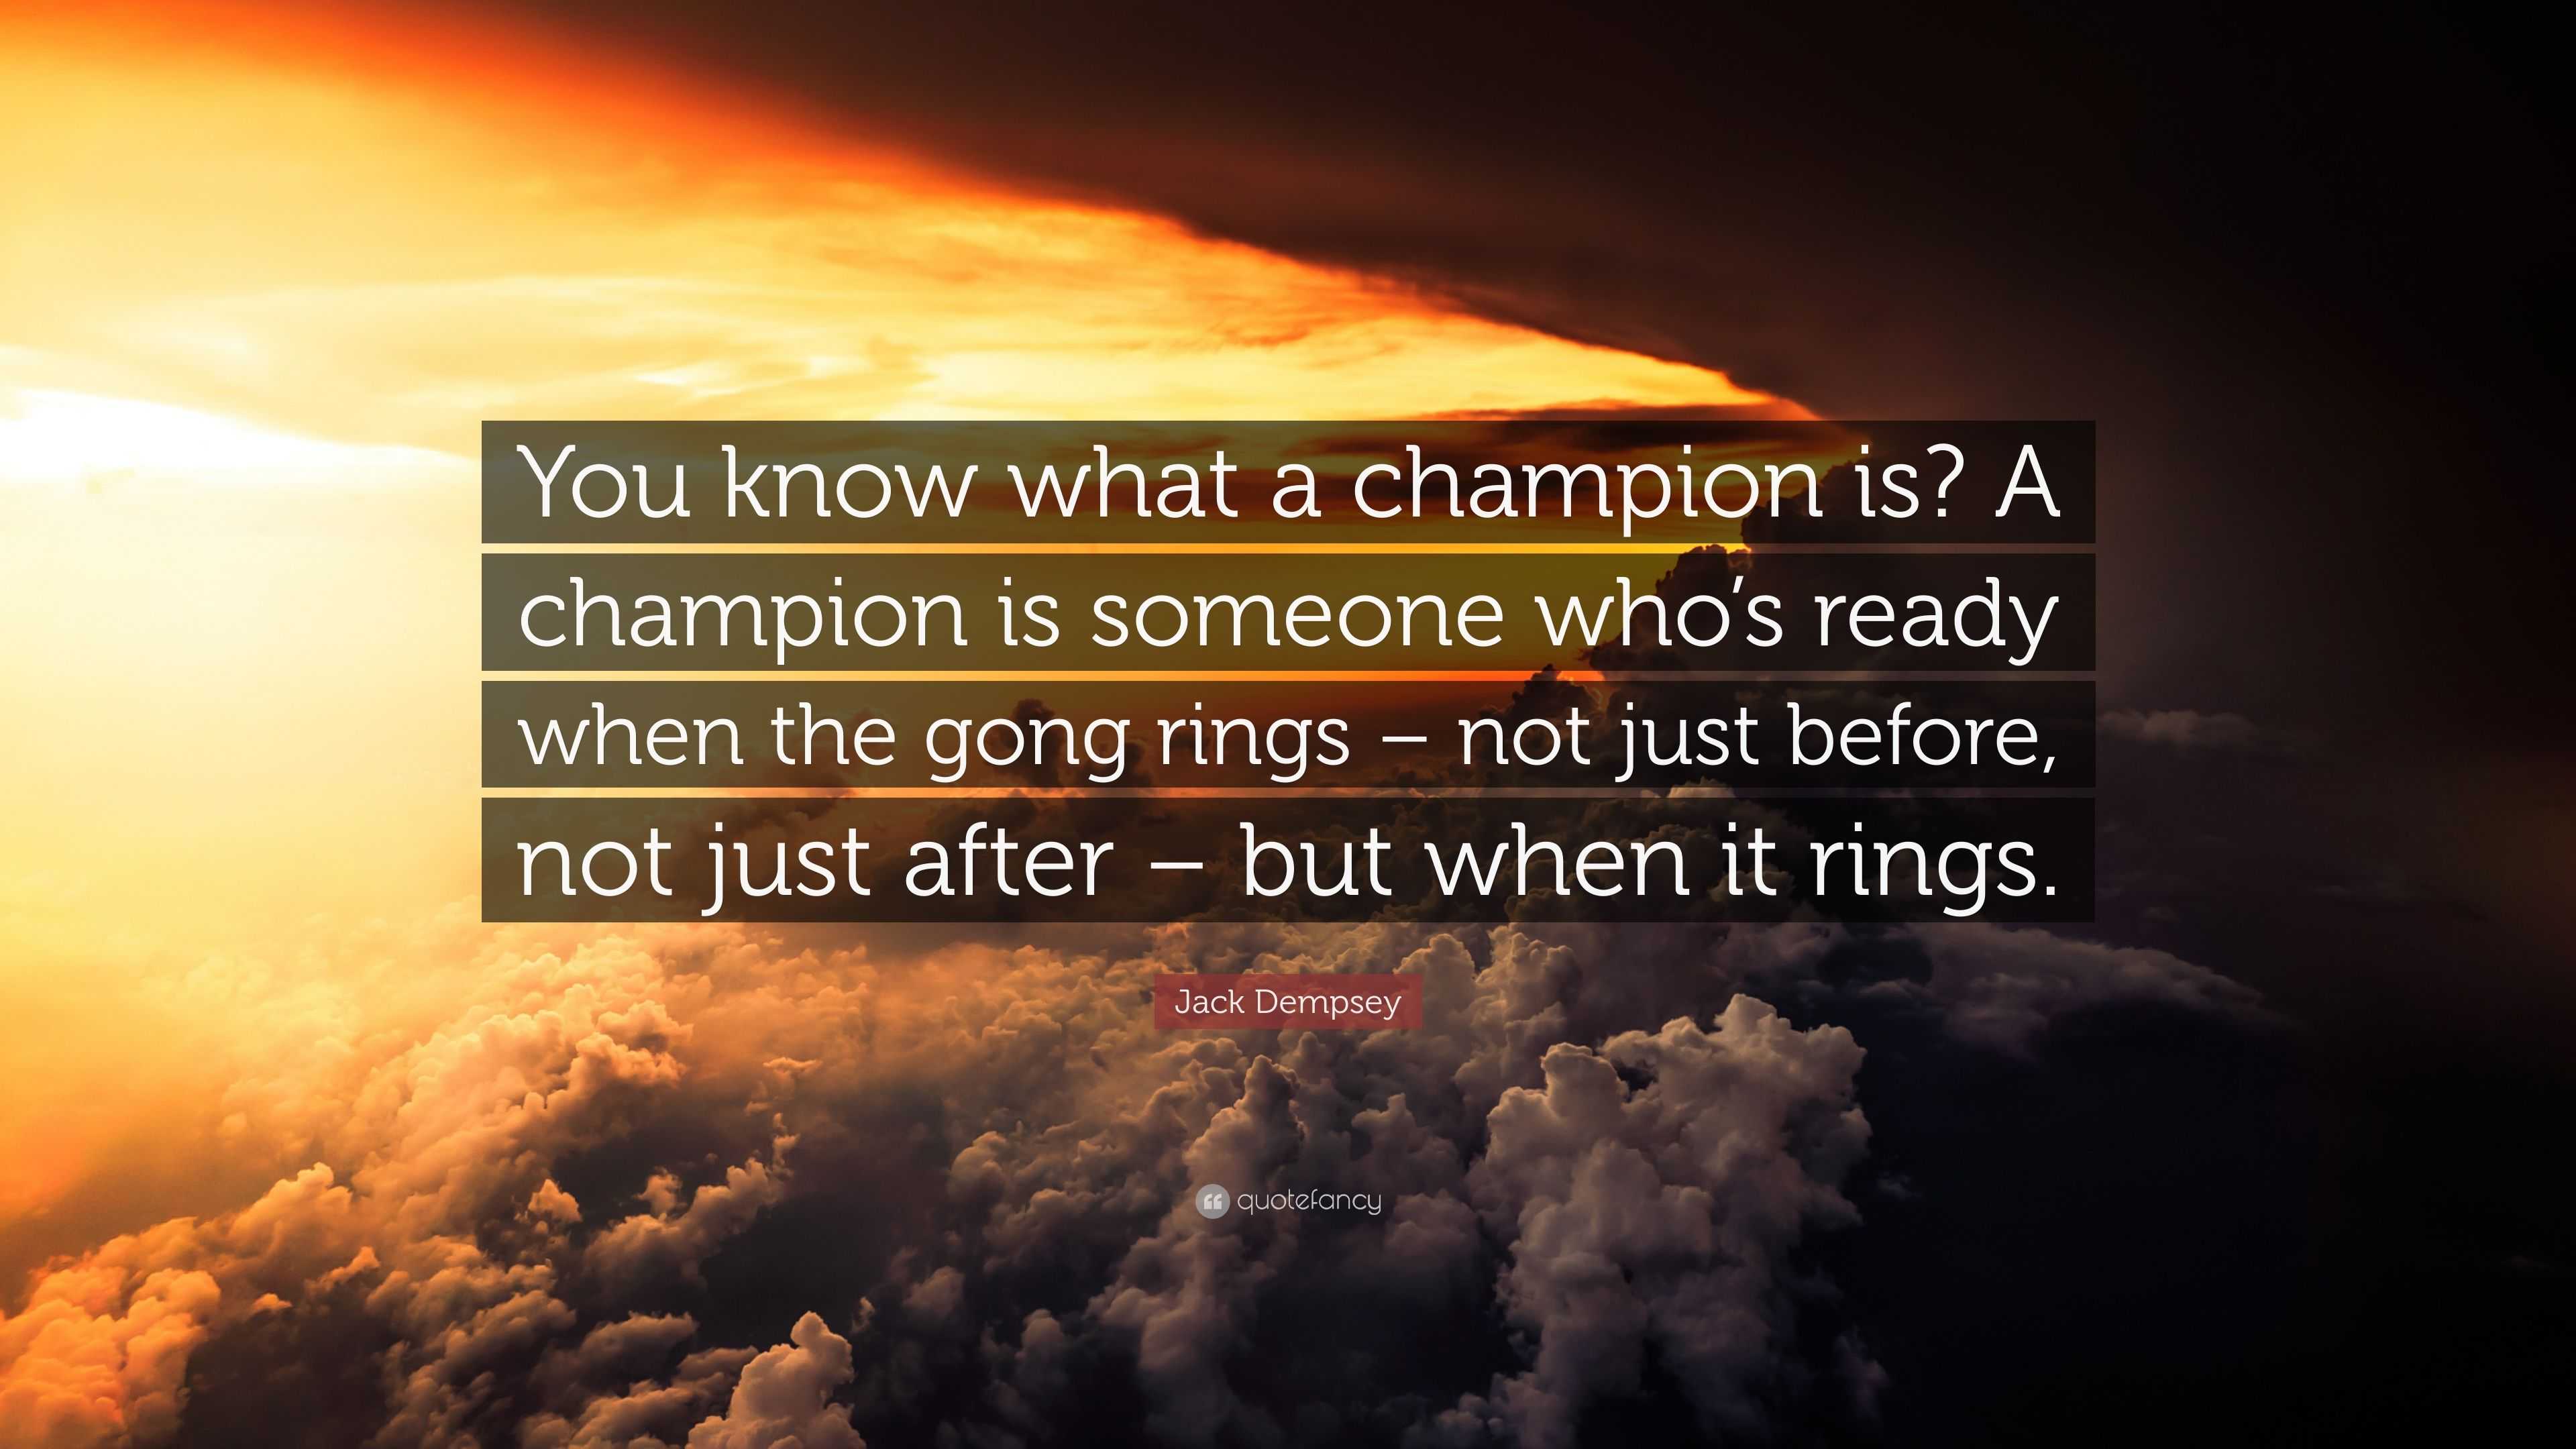 Jack Dempsey Quote: “You know what a champion is? A champion is someone ...